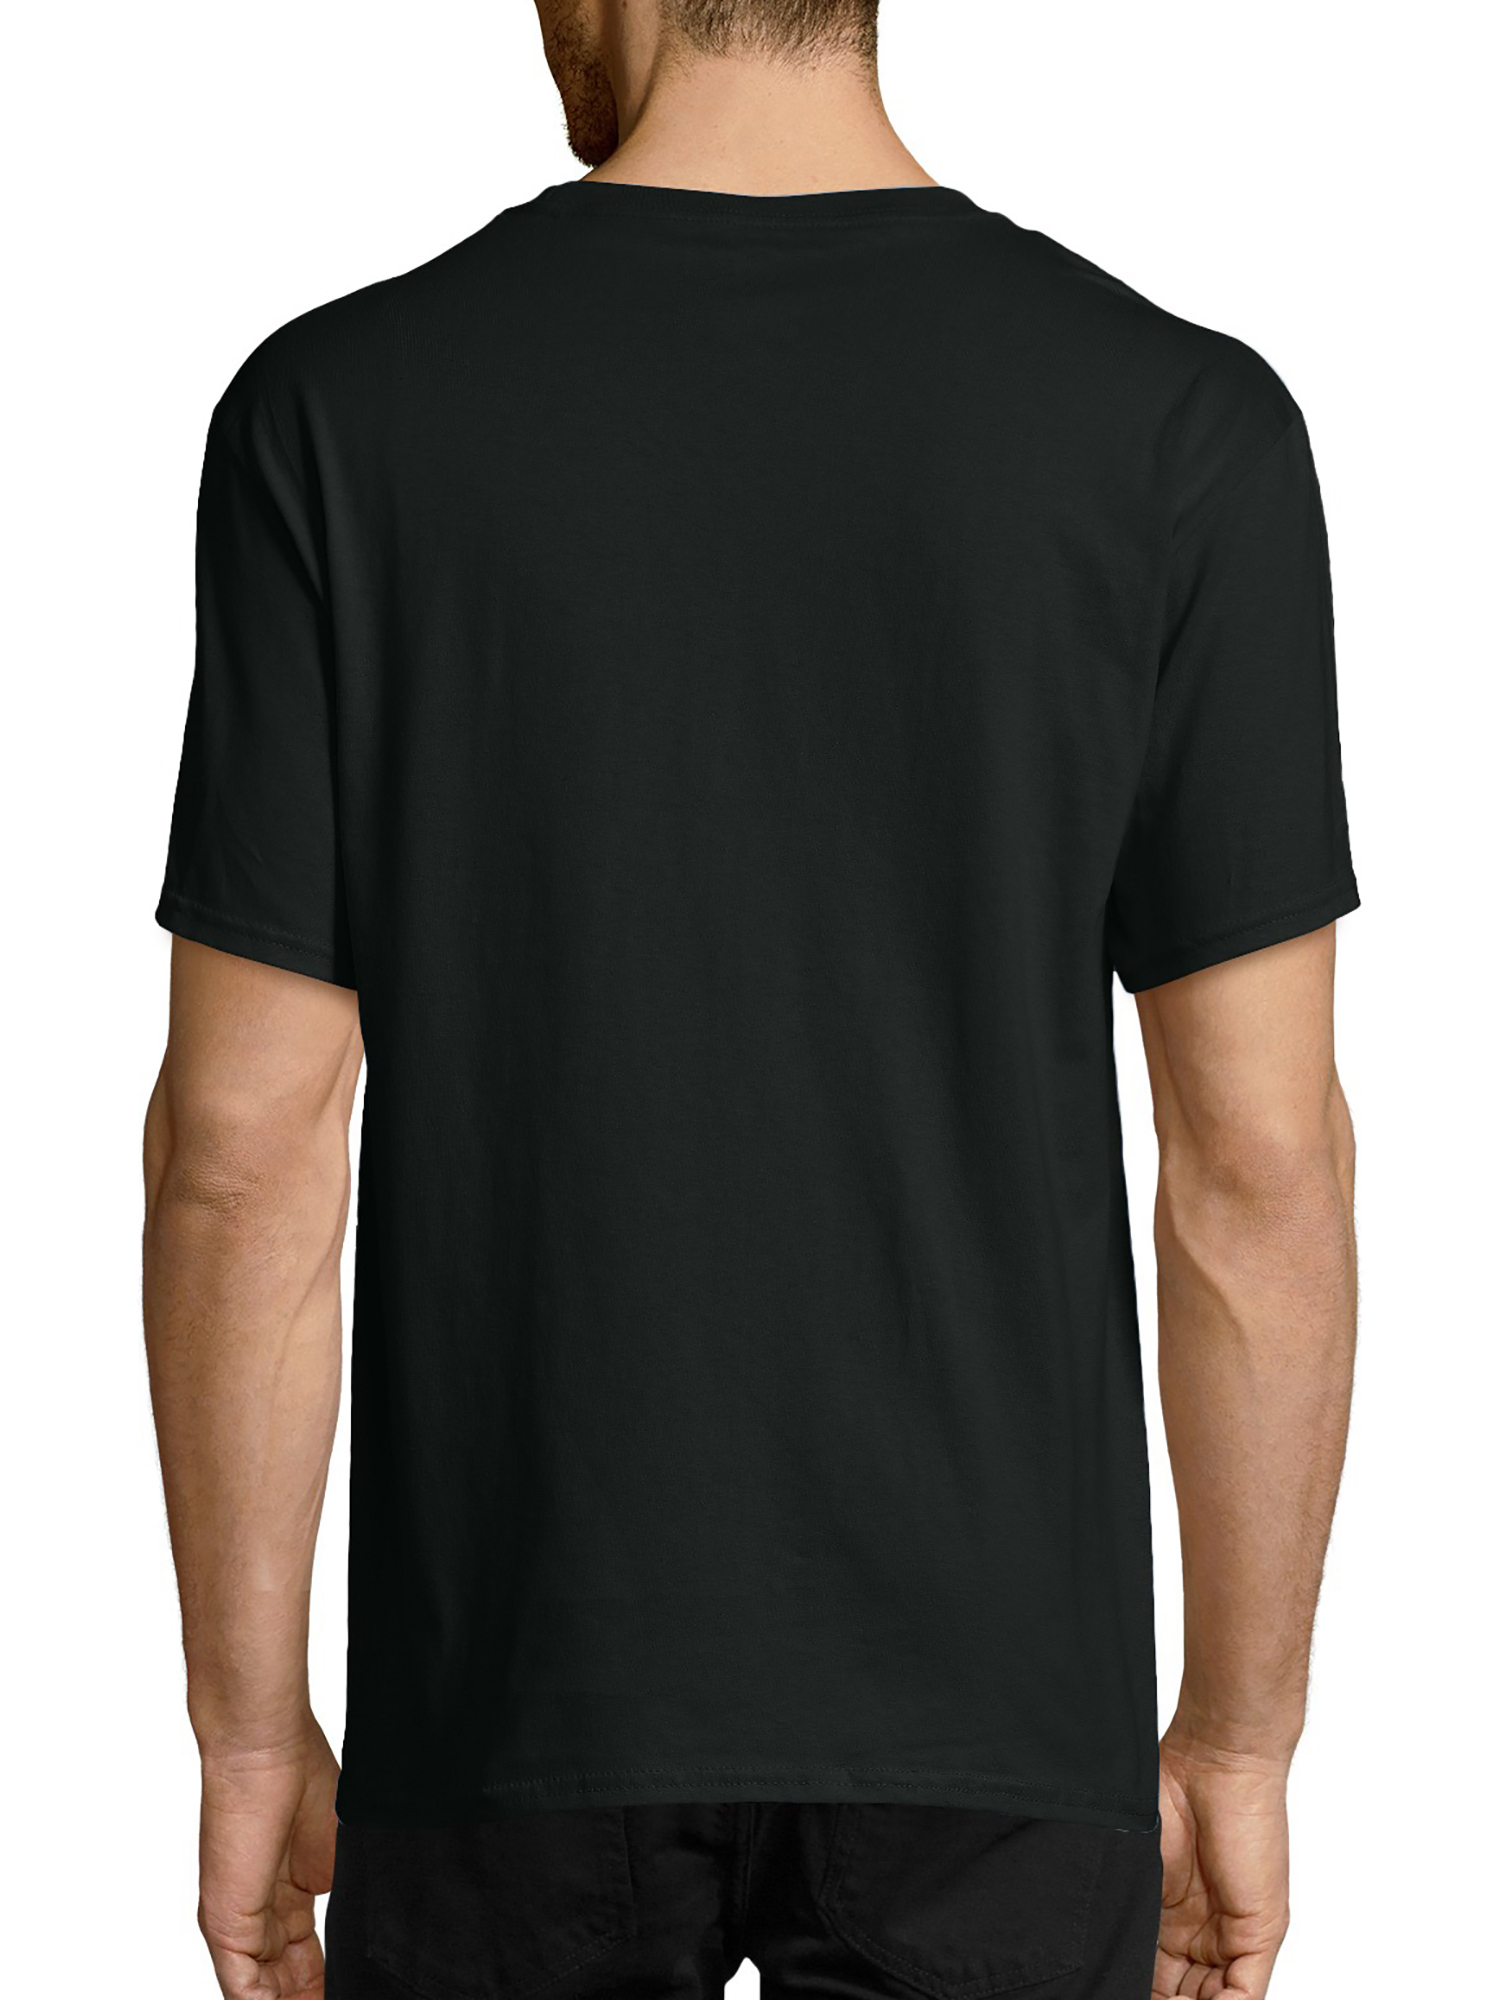 Hanes Authentic Men's T-Shirt (Big & Tall Sizes Available) Black 5XL - image 5 of 5